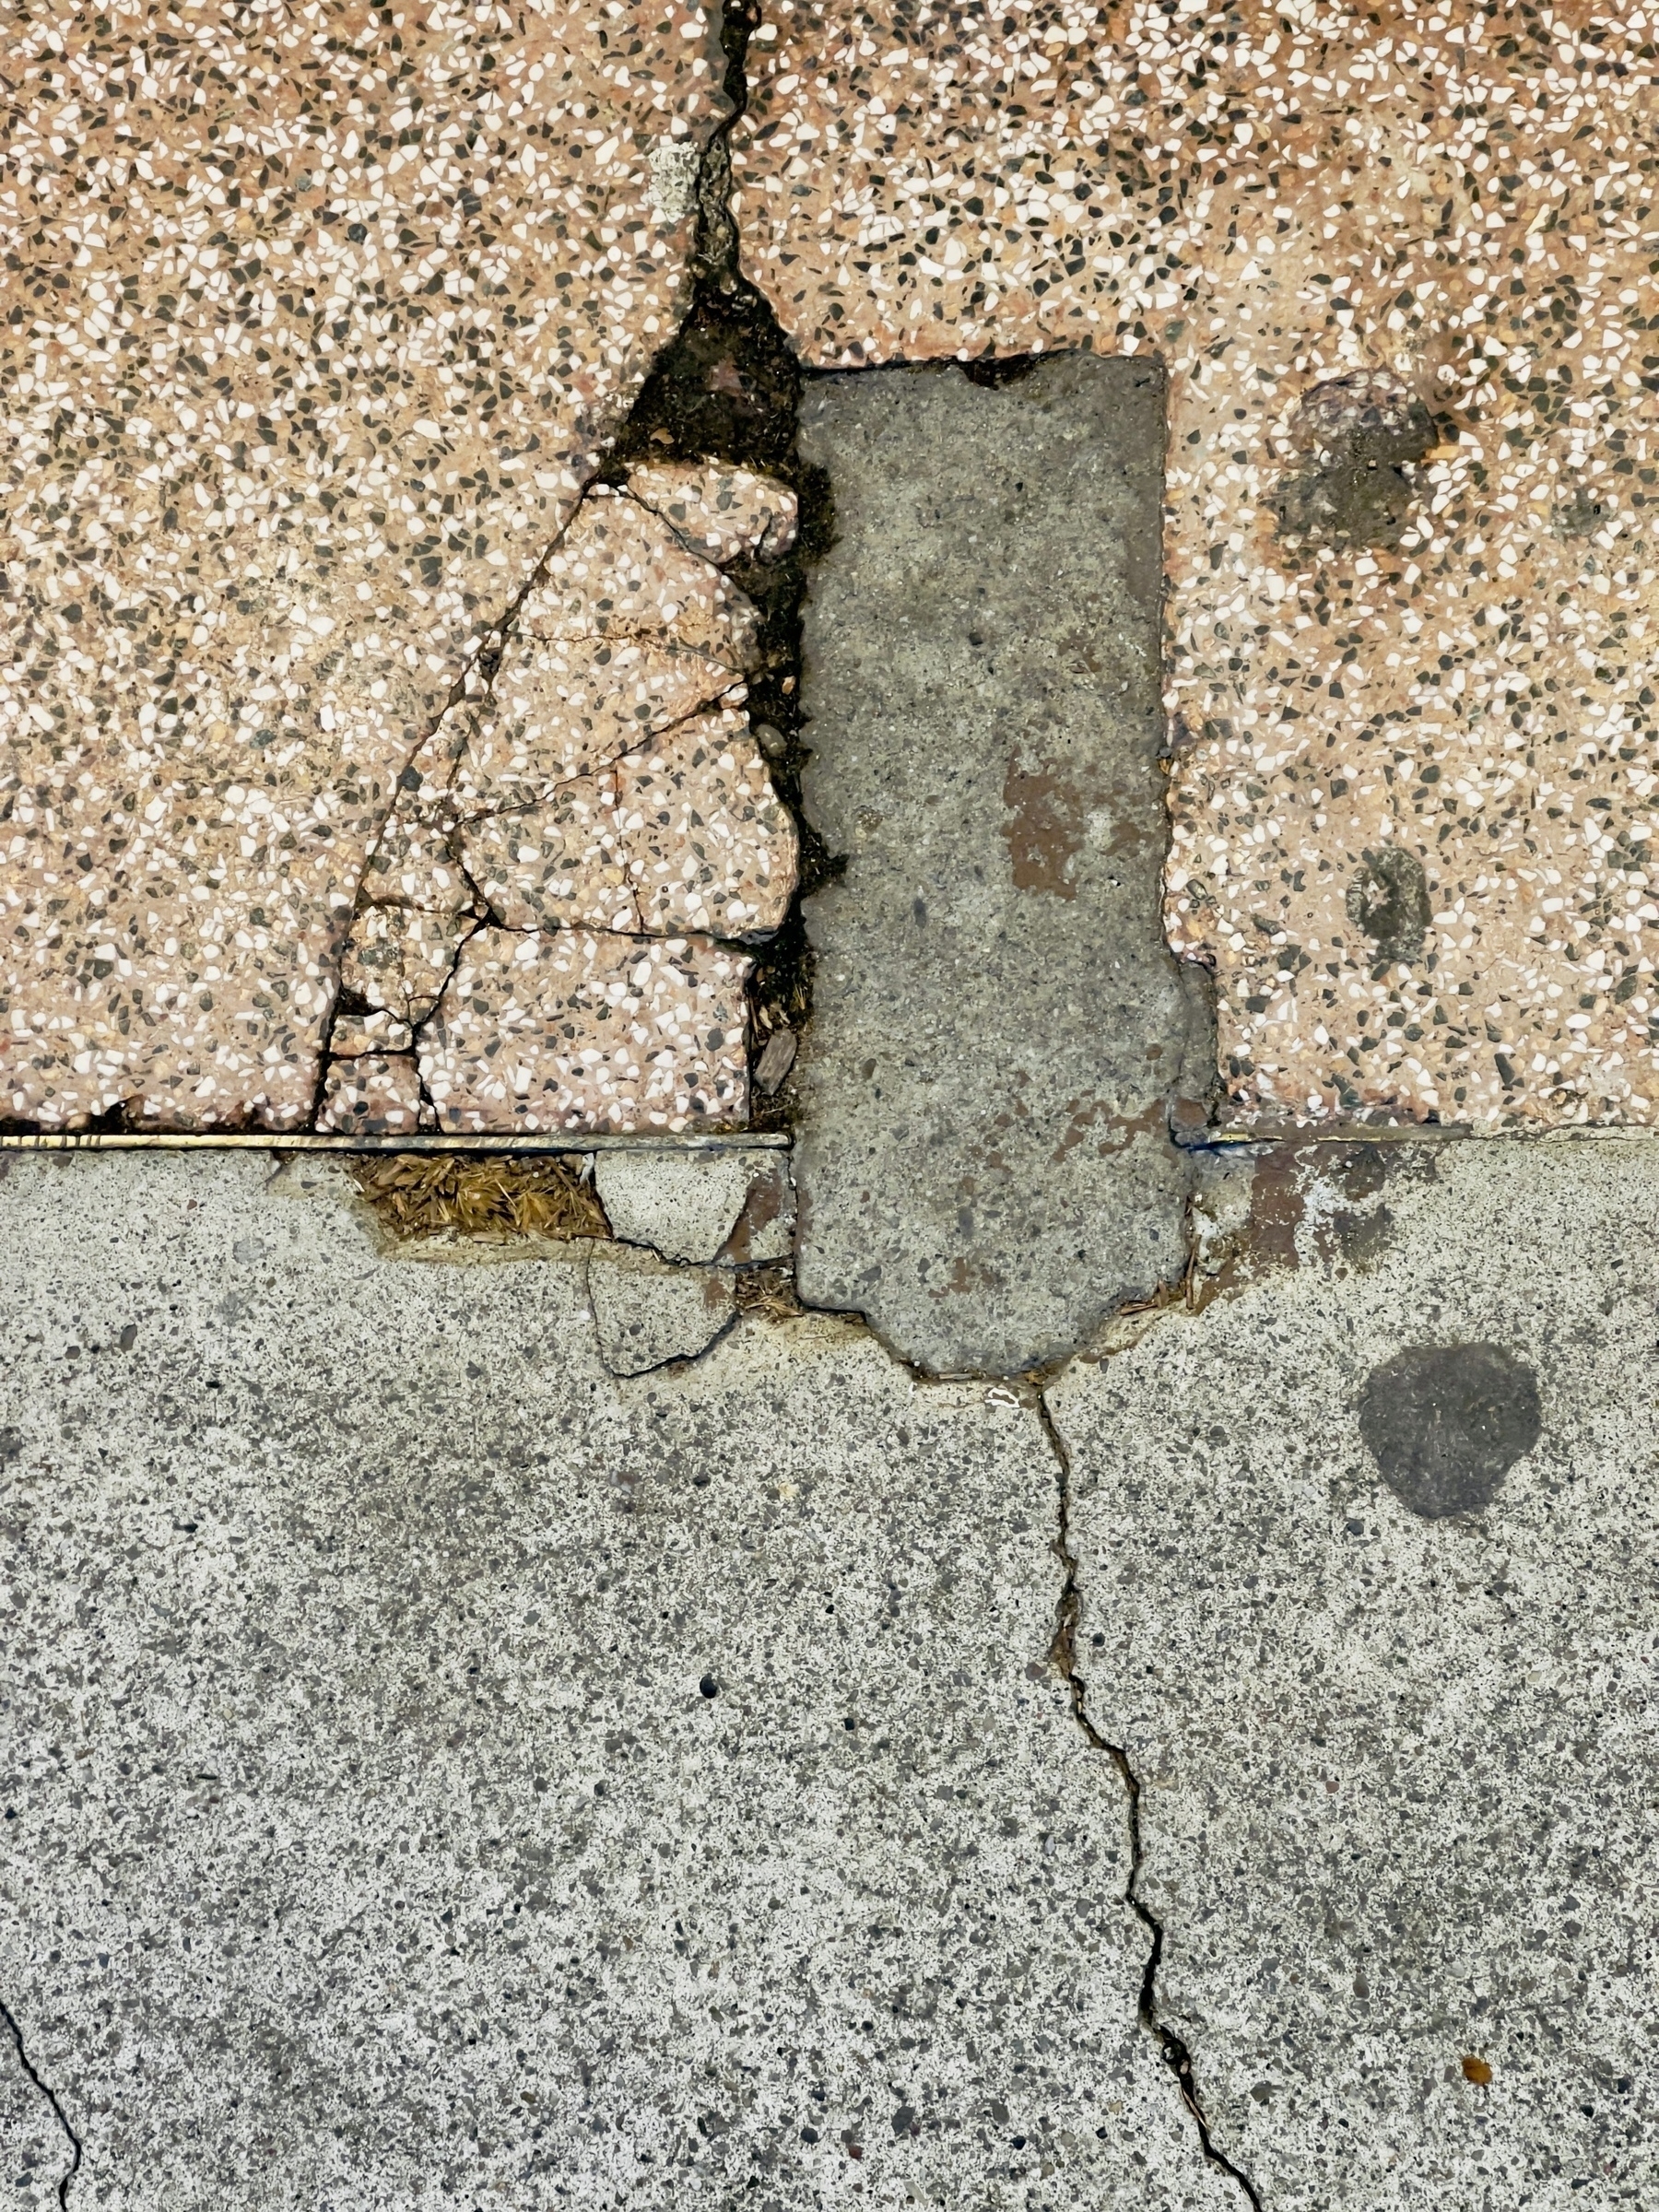 Conjunction of sidewalk texture and shapes in a rectilinear abstract.